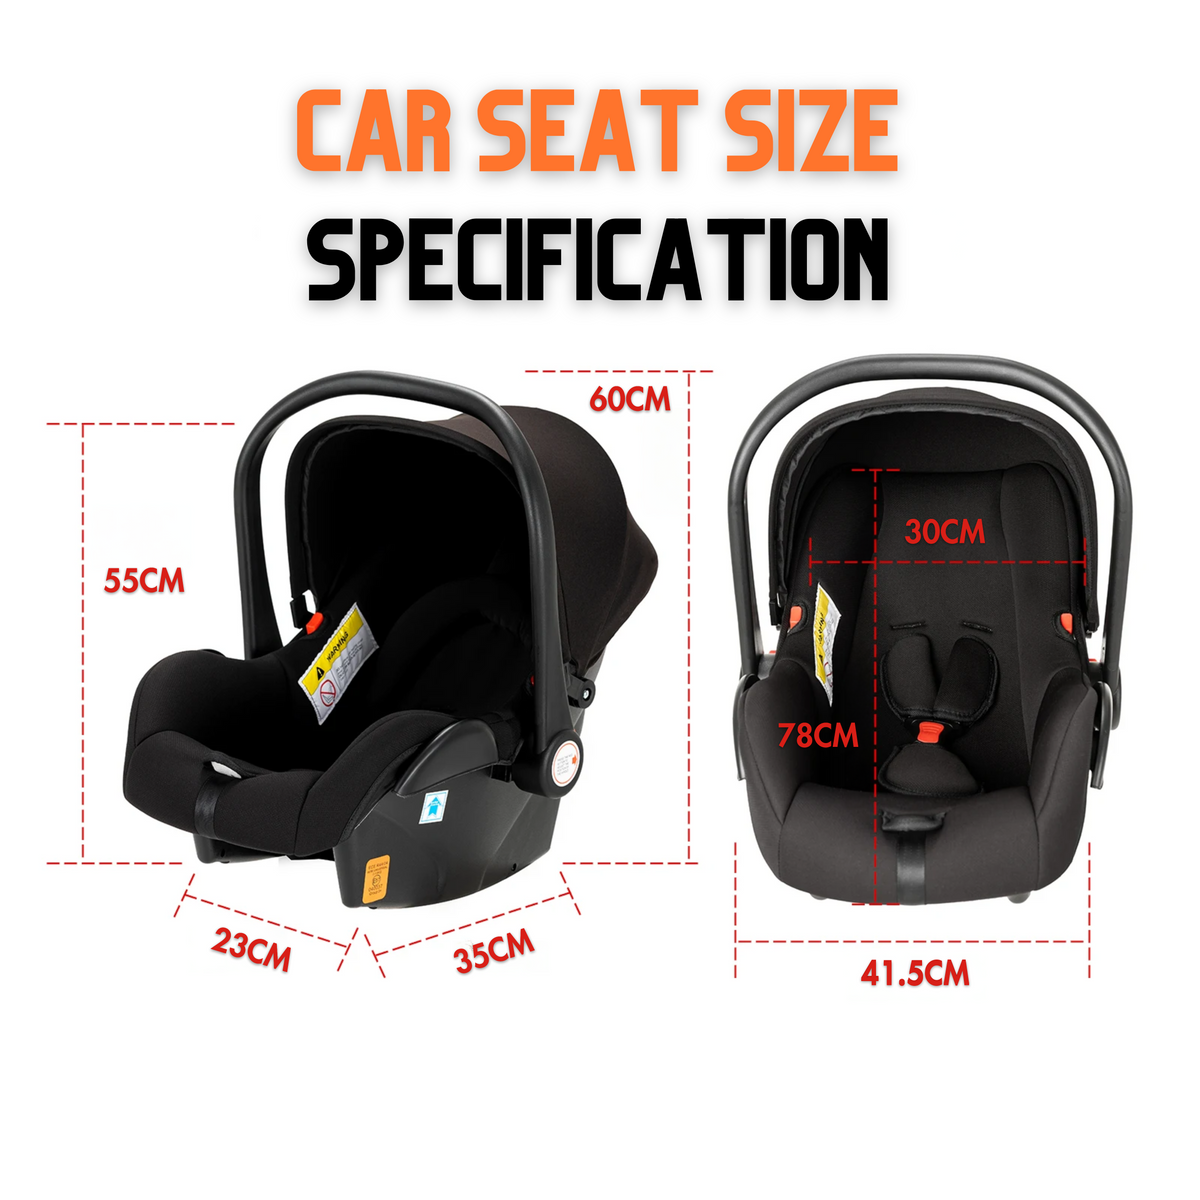 Car seat size specification